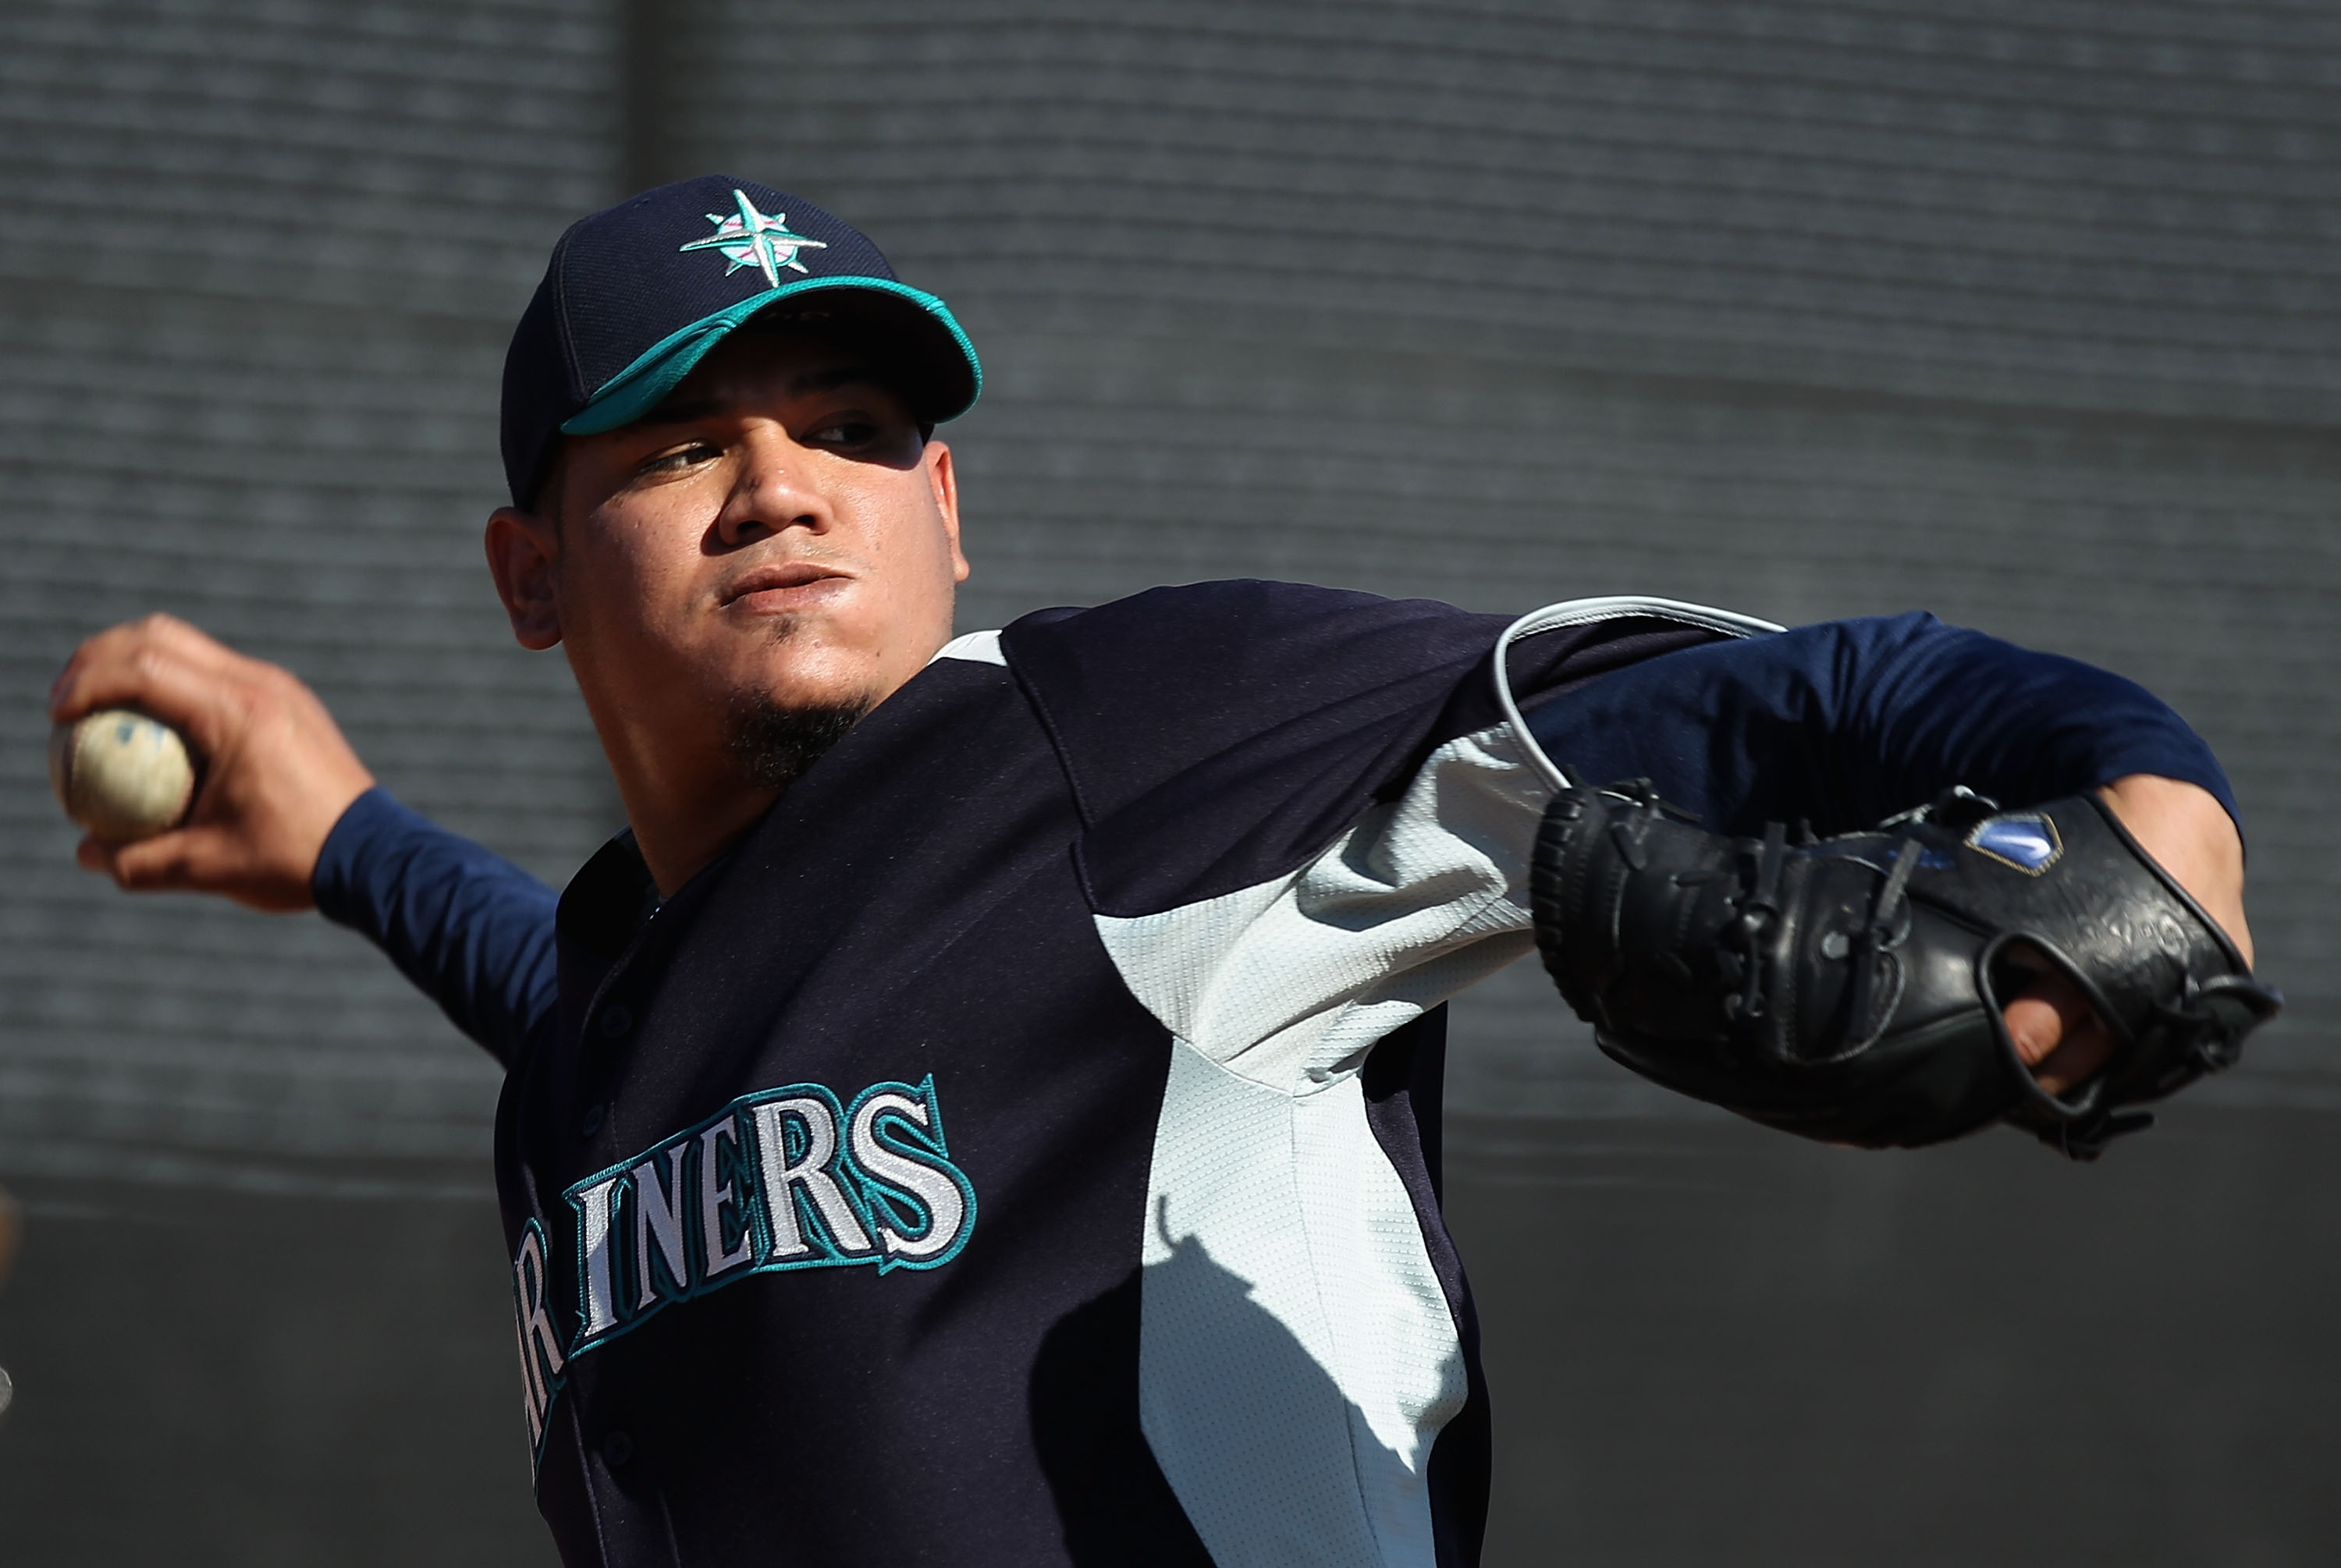 PEORIA, AZ - FEBRUARY 15:  Pitcher Felix Hernandez #34 of the Seattle Mariners throws during a MLB spring training practice at Peoria Stadium on February 15, 2011 in Peoria, Arizona.  (Photo by Christian Petersen/Getty Images)